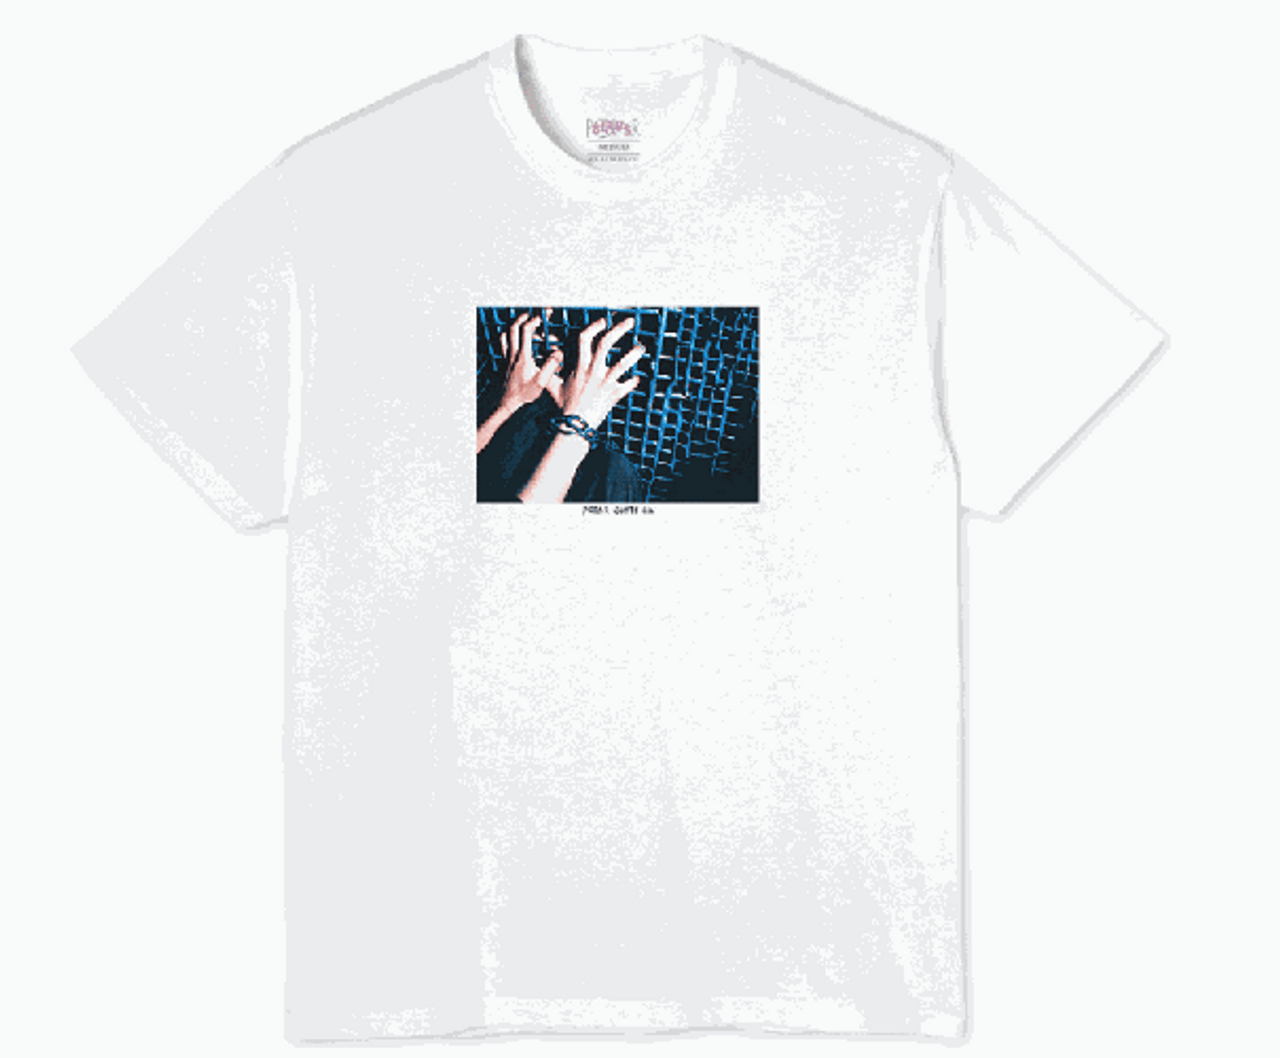 Polar Caged Hands White Tshirt MD